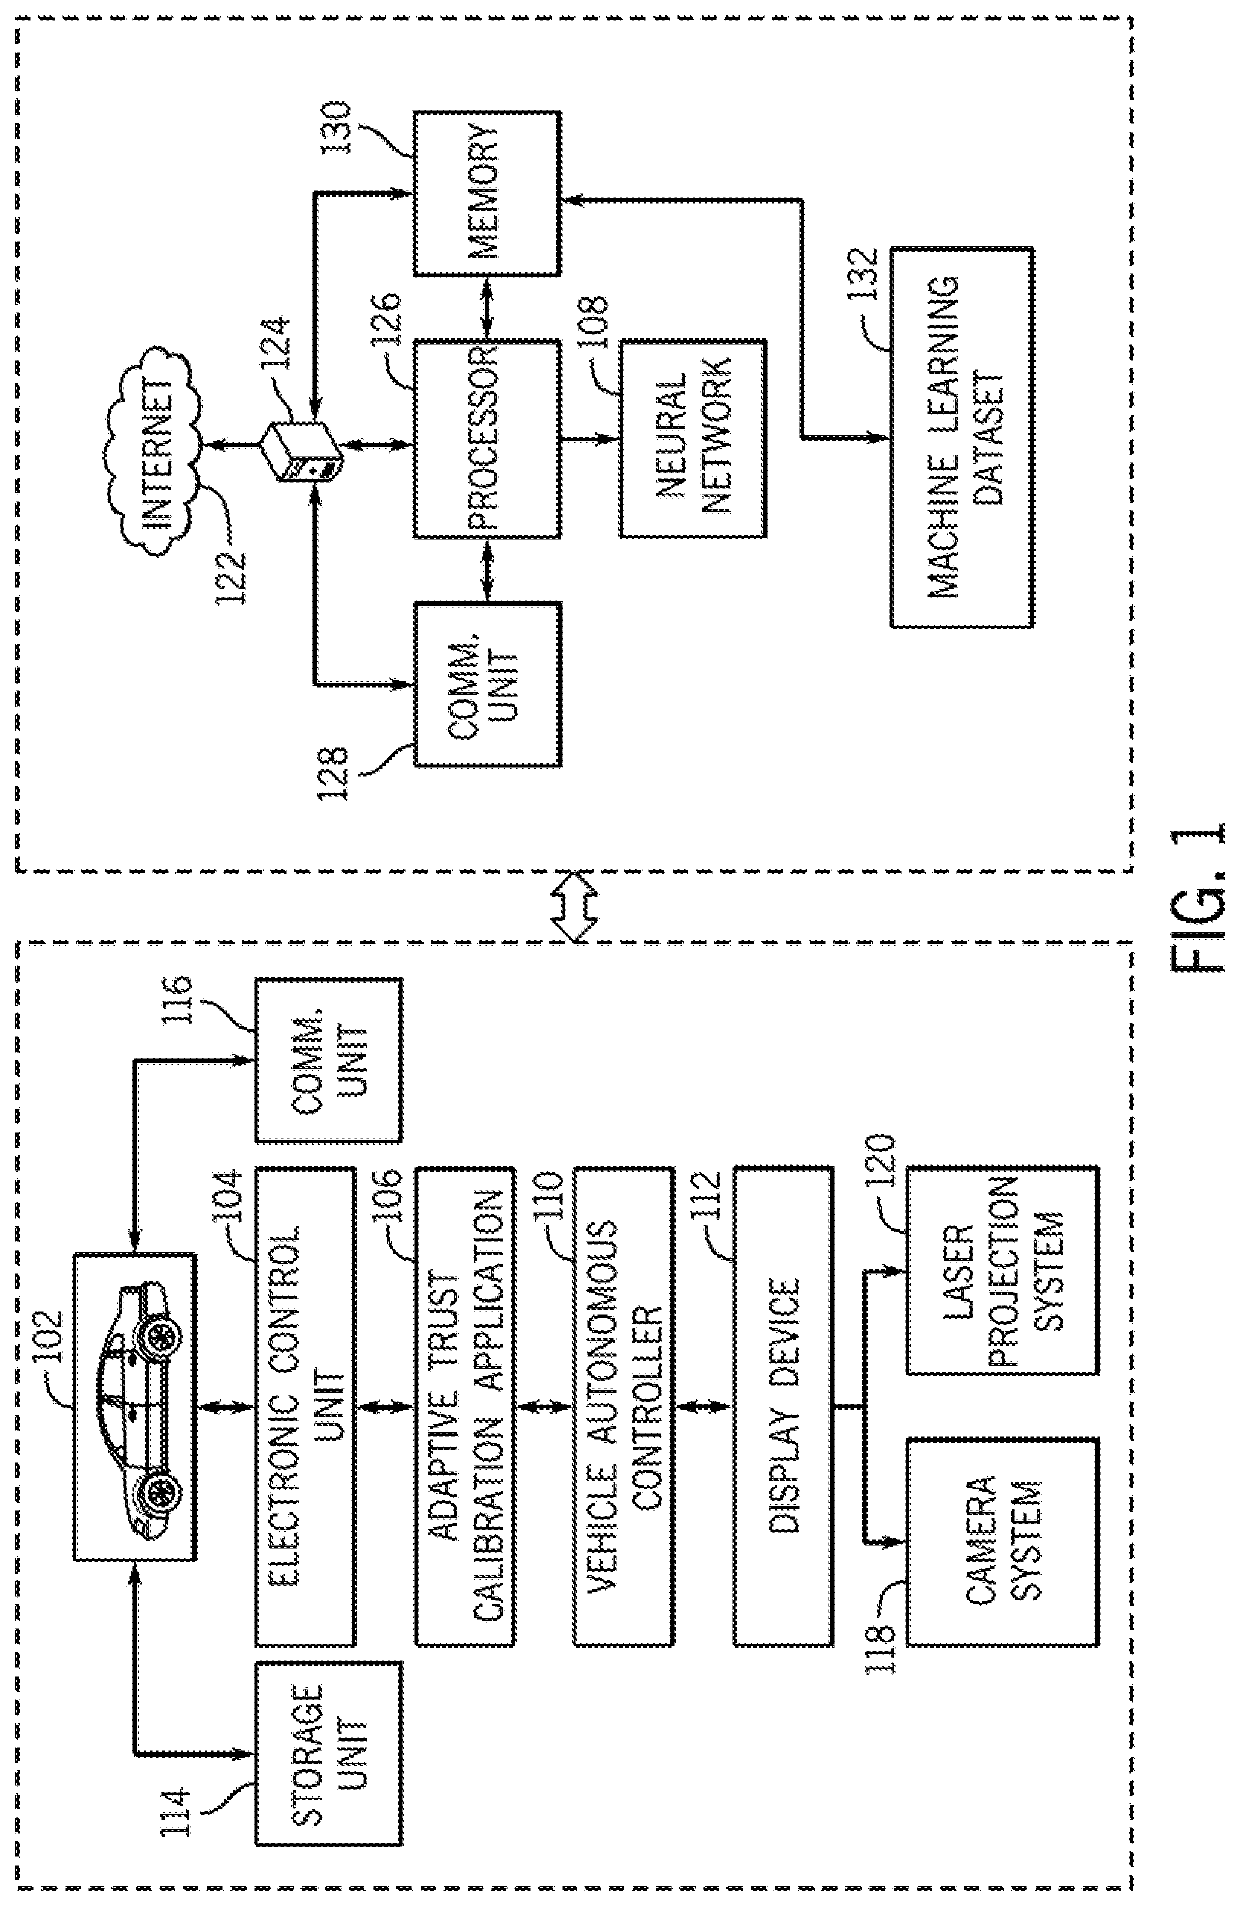 System and method for providing adaptive trust calibration in driving automation